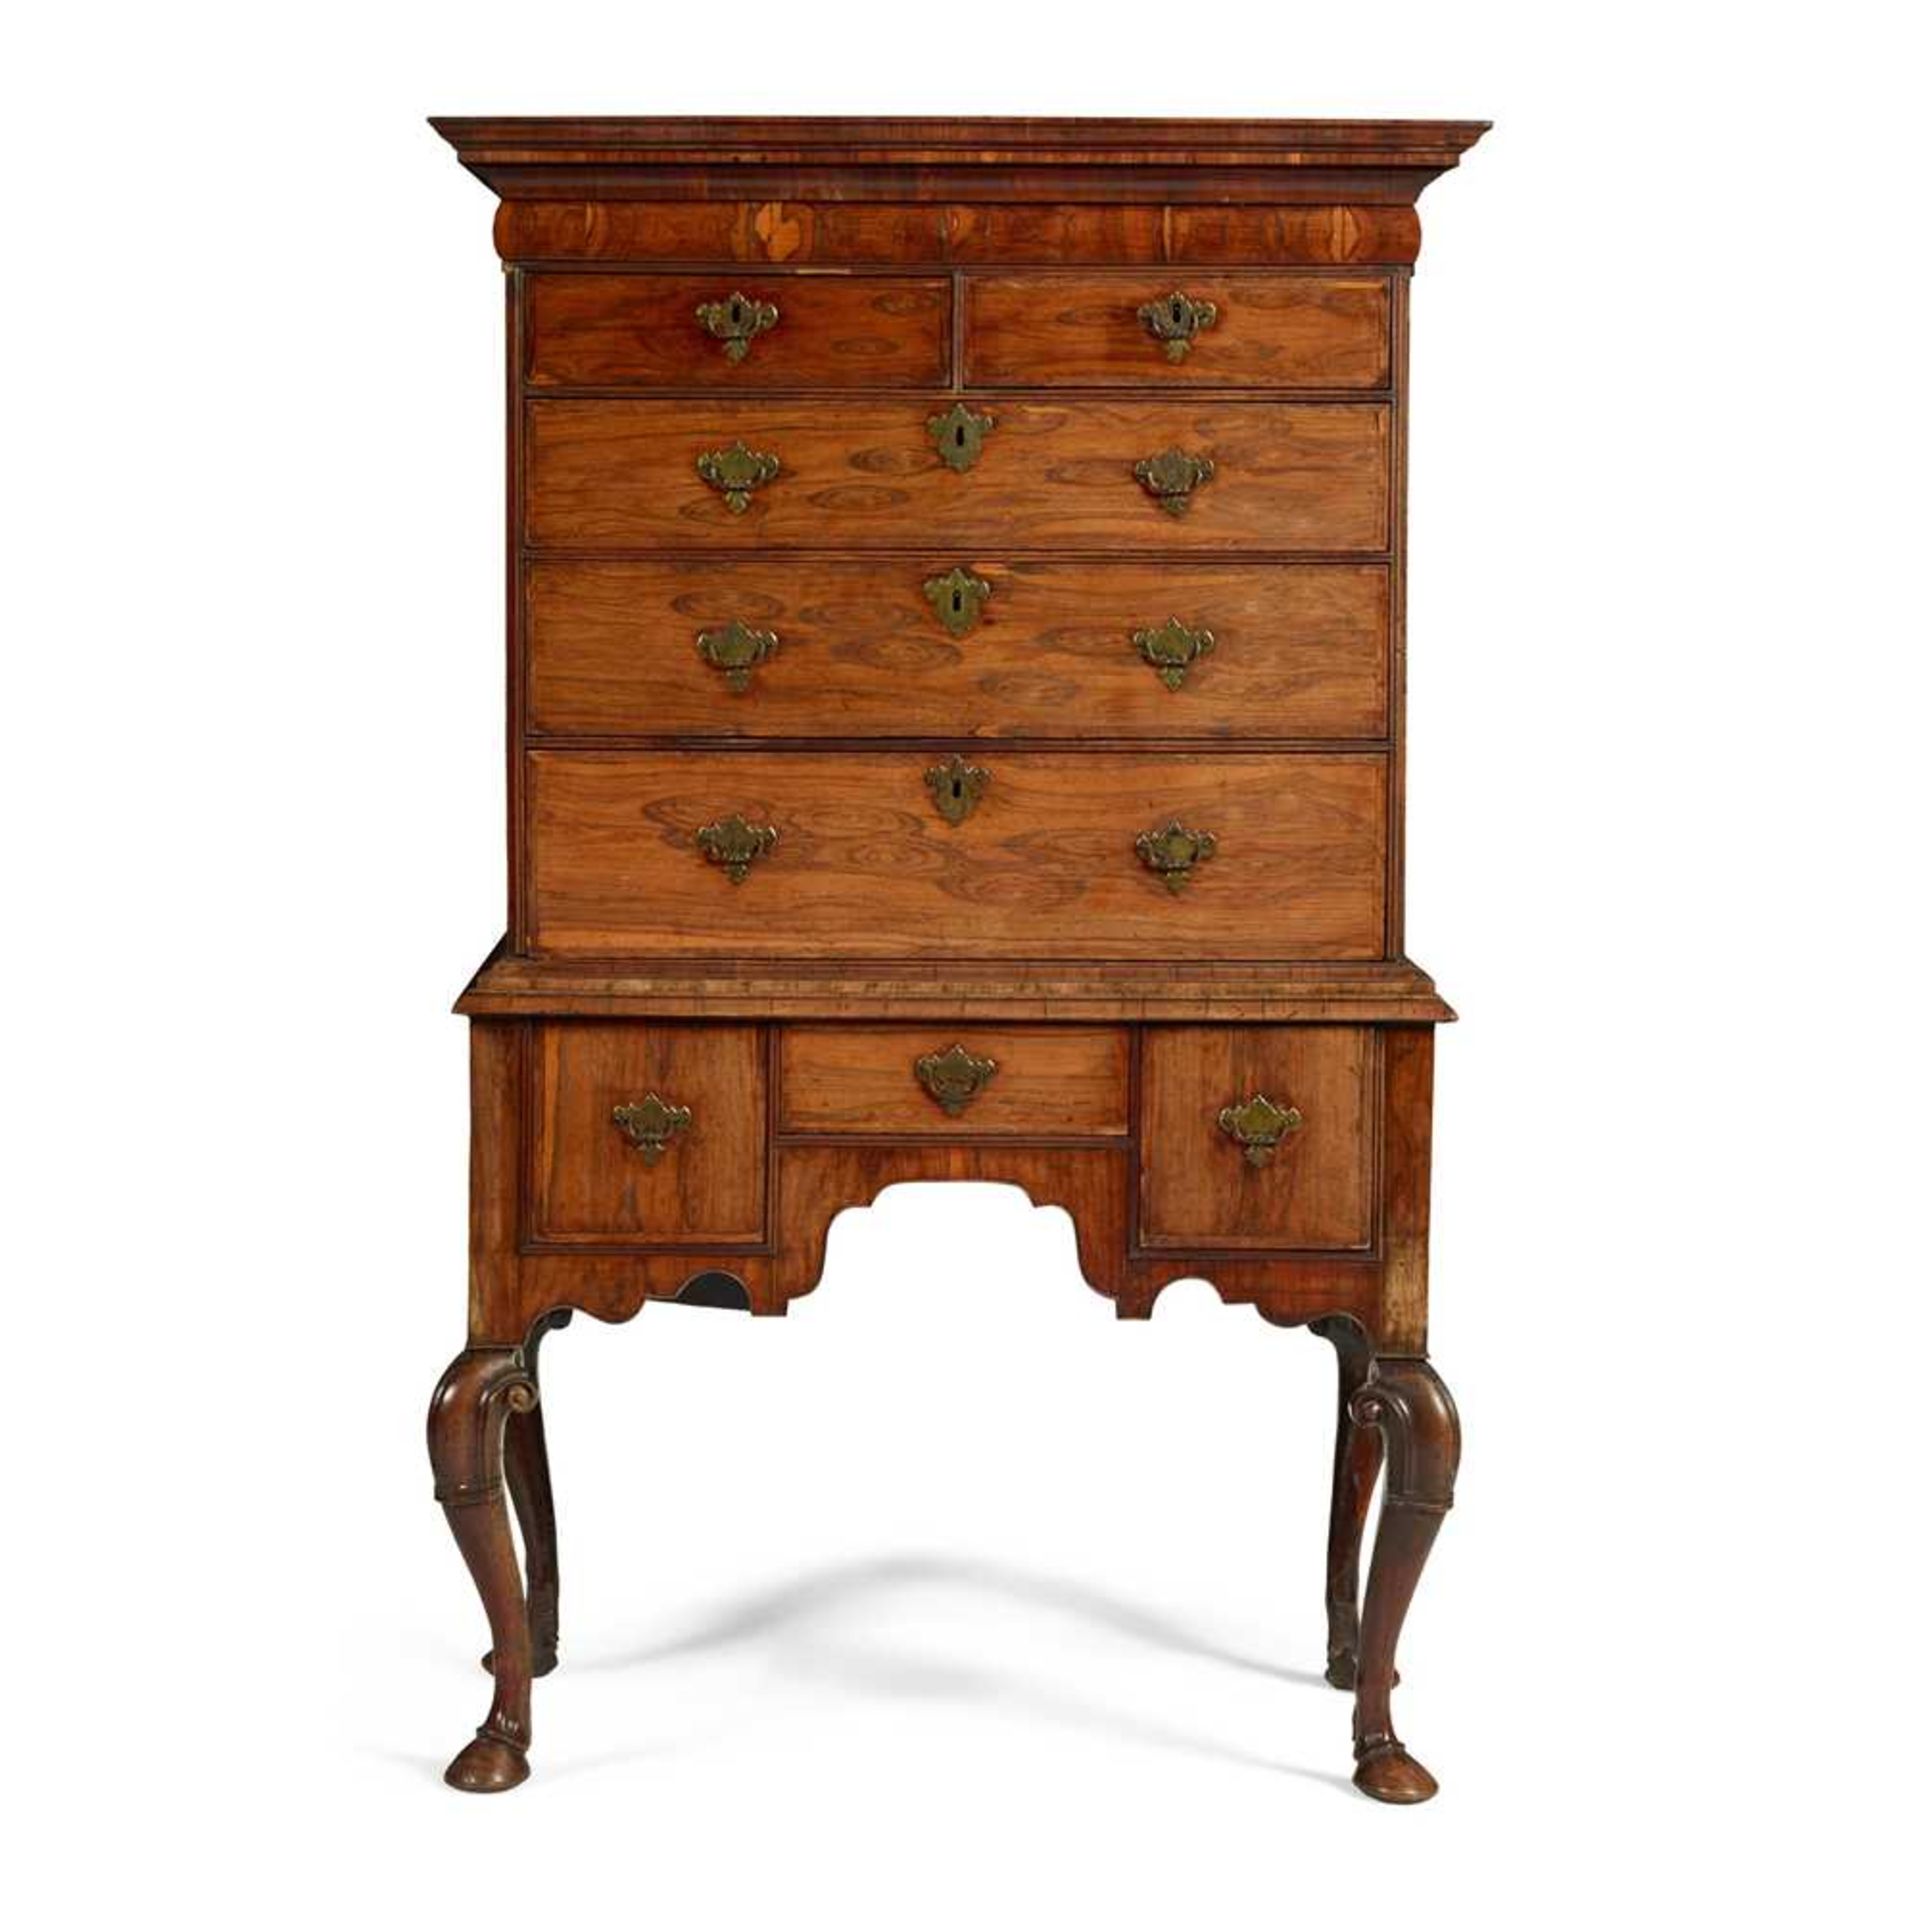 GEORGE I WALNUT CHEST-ON-STAND EARLY 18TH CENTURY